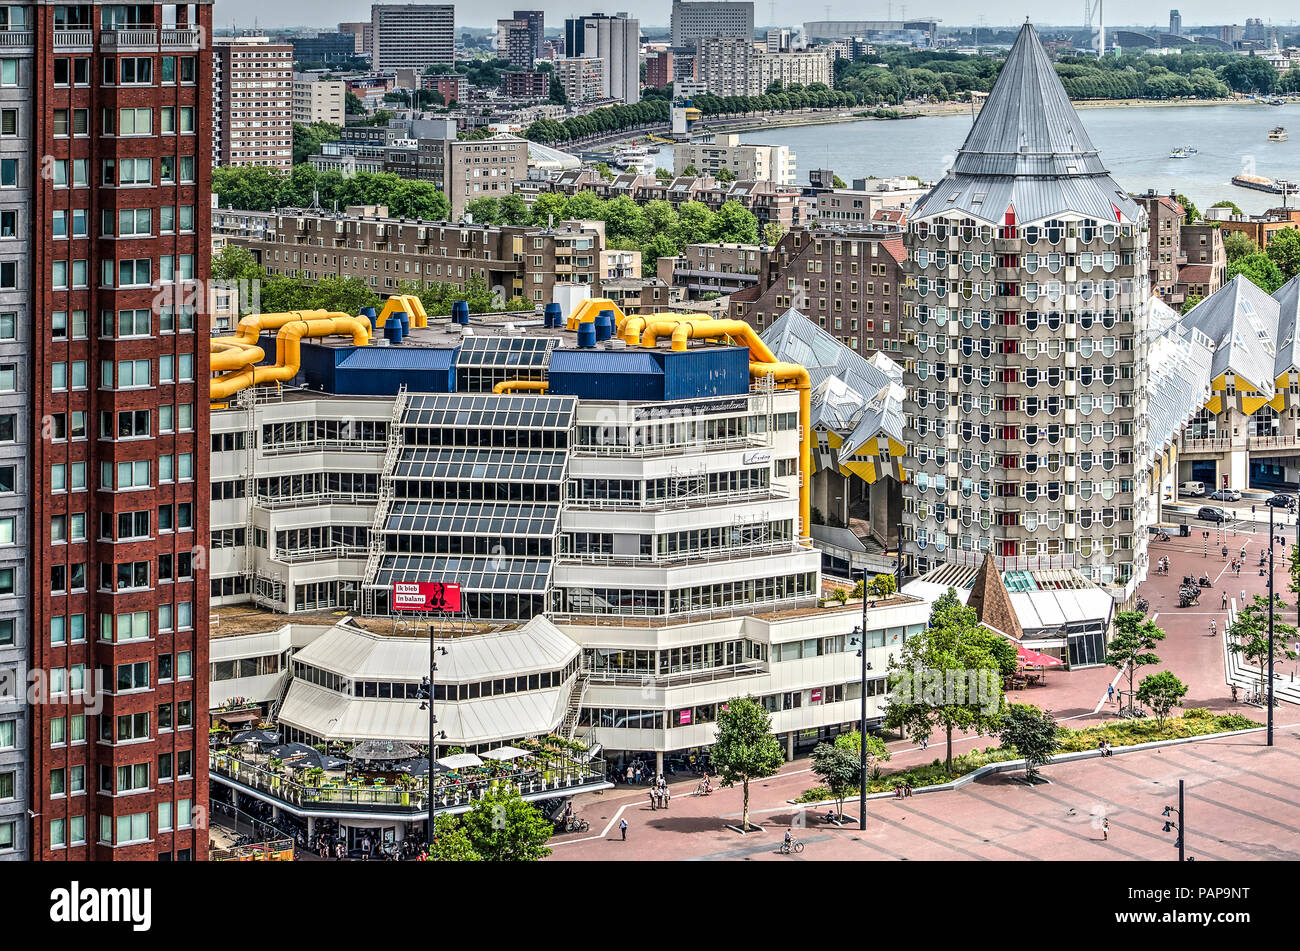 Rotterdam, The Netherlands, July 18, 2018: aerial view of the municipal library, completed in 1983 to a design by Van den Broek & Bakema architects Stock Photo